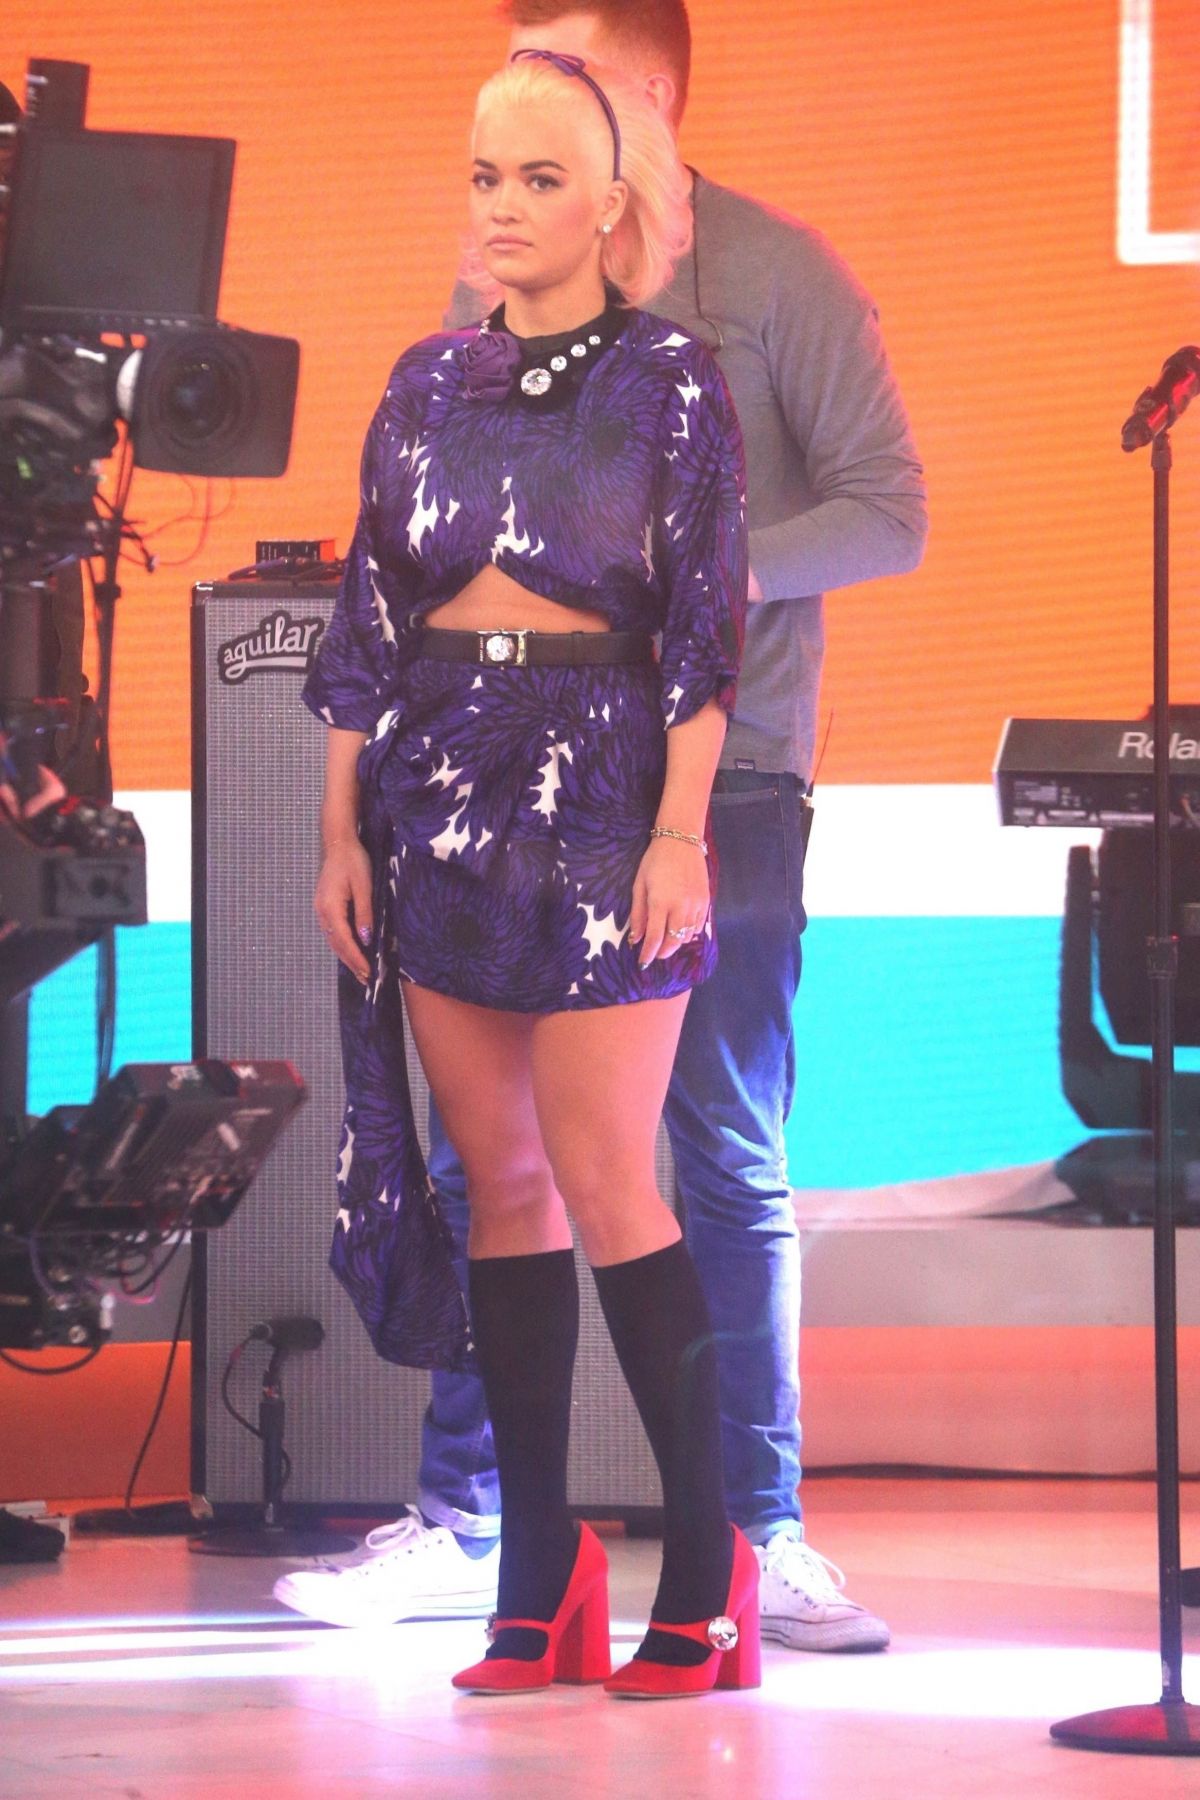 rita-ora-performs-only-want-you-at-today-show-03-25-2019-10.jpg